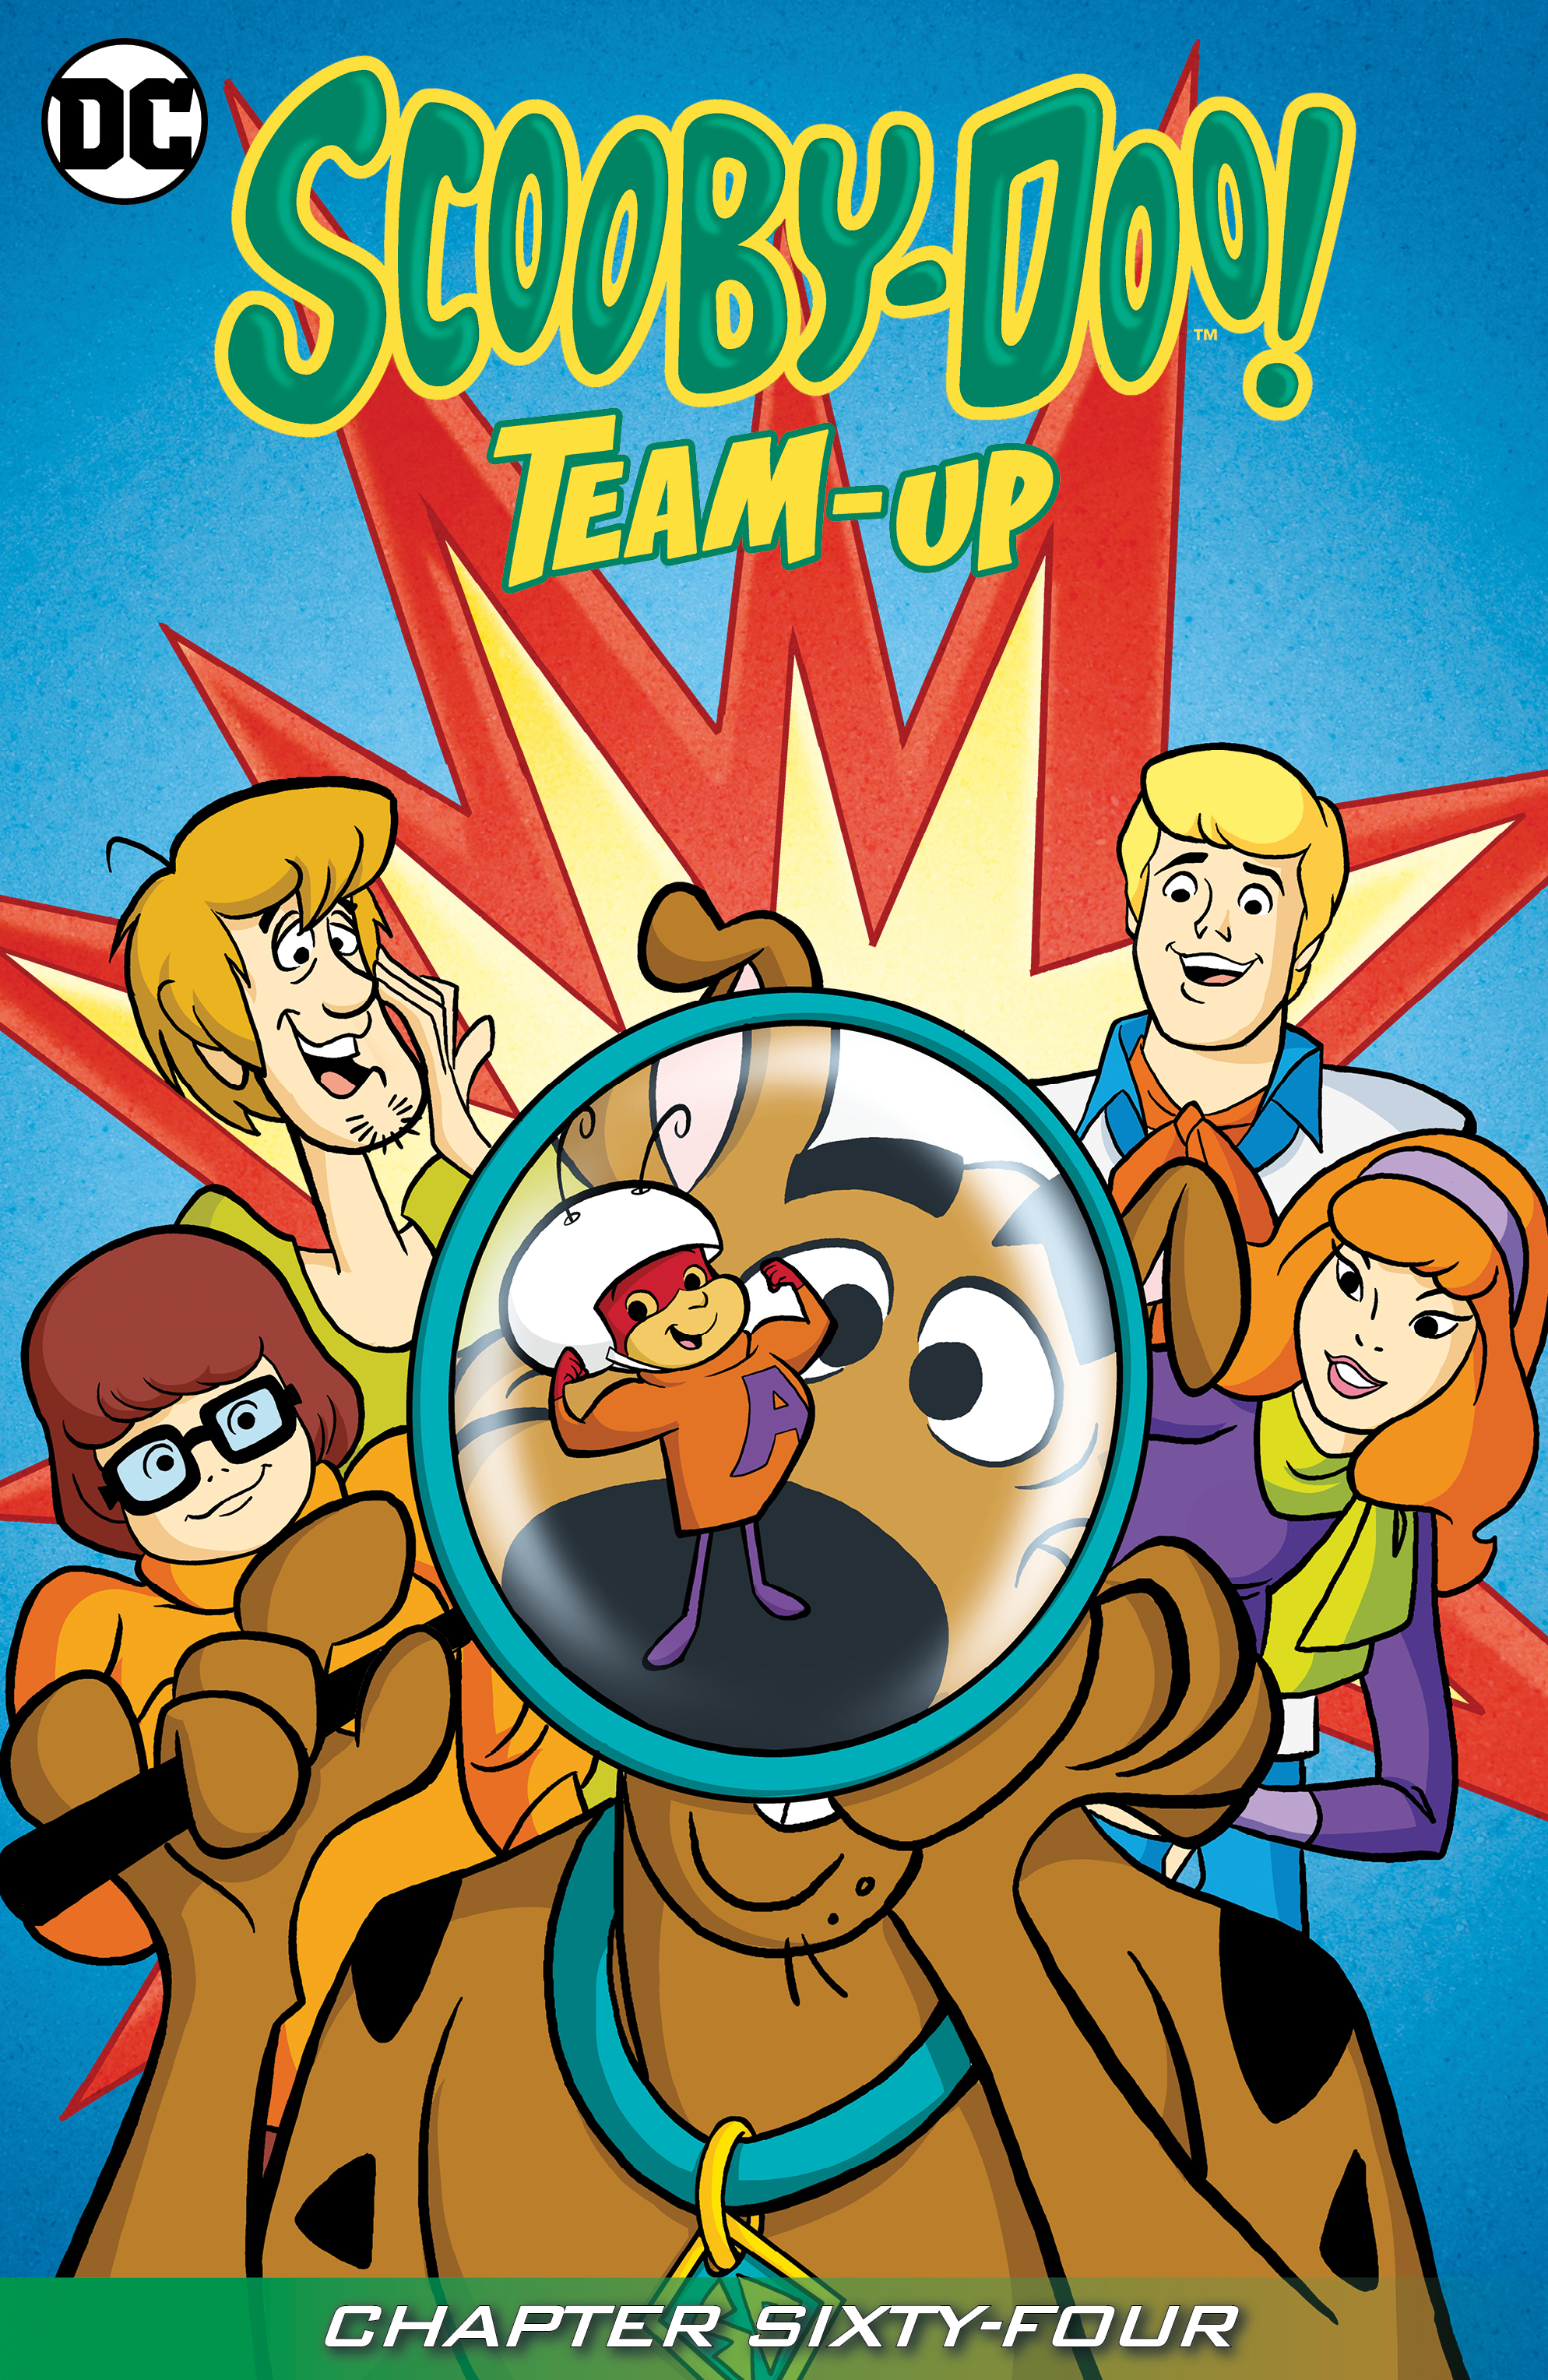 Scooby-Doo Team-Up #64 preview images